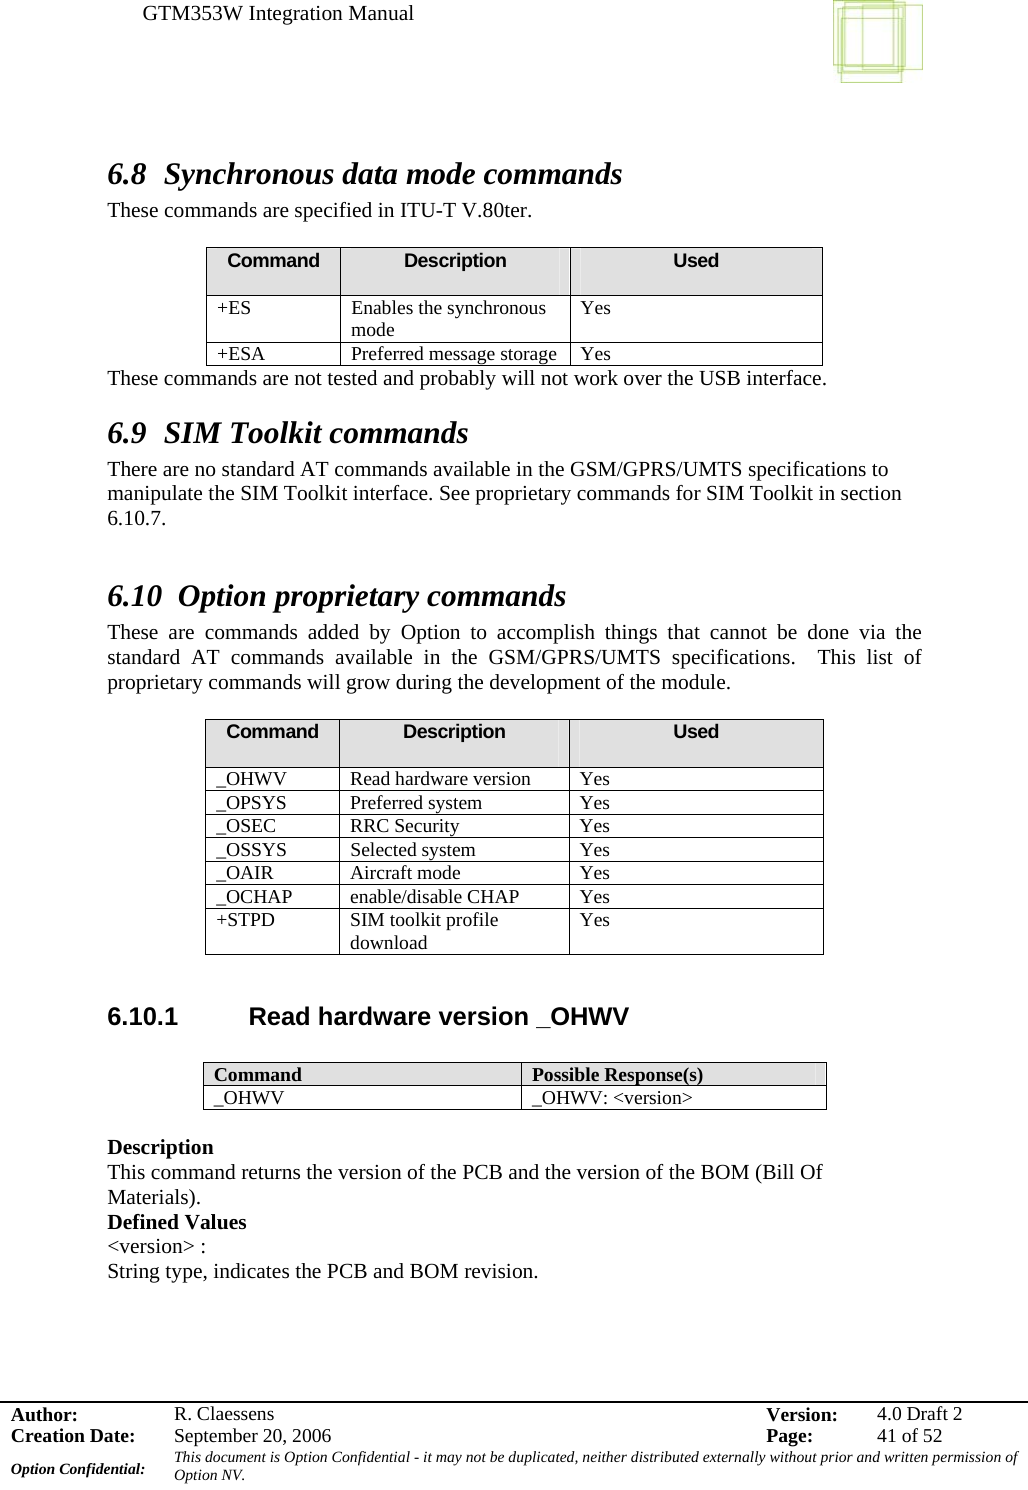 GTM353W Integration Manual      Author: R. Claessens  Version:  4.0 Draft 2Creation Date:  September 20, 2006  Page:  41 of 52 Option Confidential:  This document is Option Confidential - it may not be duplicated, neither distributed externally without prior and written permission of Option NV.    6.8 Synchronous data mode commands These commands are specified in ITU-T V.80ter.  Command  Description  Used +ES Enables the synchronous mode  Yes +ESA  Preferred message storage  Yes These commands are not tested and probably will not work over the USB interface. 6.9 SIM Toolkit commands There are no standard AT commands available in the GSM/GPRS/UMTS specifications to manipulate the SIM Toolkit interface. See proprietary commands for SIM Toolkit in section 6.10.7.   6.10 Option proprietary commands These are commands added by Option to accomplish things that cannot be done via the standard AT commands available in the GSM/GPRS/UMTS specifications.  This list of proprietary commands will grow during the development of the module.  Command  Description  Used _OHWV  Read hardware version  Yes _OPSYS Preferred system  Yes _OSEC RRC Security  Yes _OSSYS Selected system  Yes _OAIR Aircraft mode  Yes _OCHAP enable/disable CHAP Yes +STPD SIM toolkit profile download  Yes  6.10.1  Read hardware version _OHWV  Command  Possible Response(s) _OHWV _OHWV: &lt;version&gt;  Description  This command returns the version of the PCB and the version of the BOM (Bill Of Materials). Defined Values &lt;version&gt; : String type, indicates the PCB and BOM revision.  